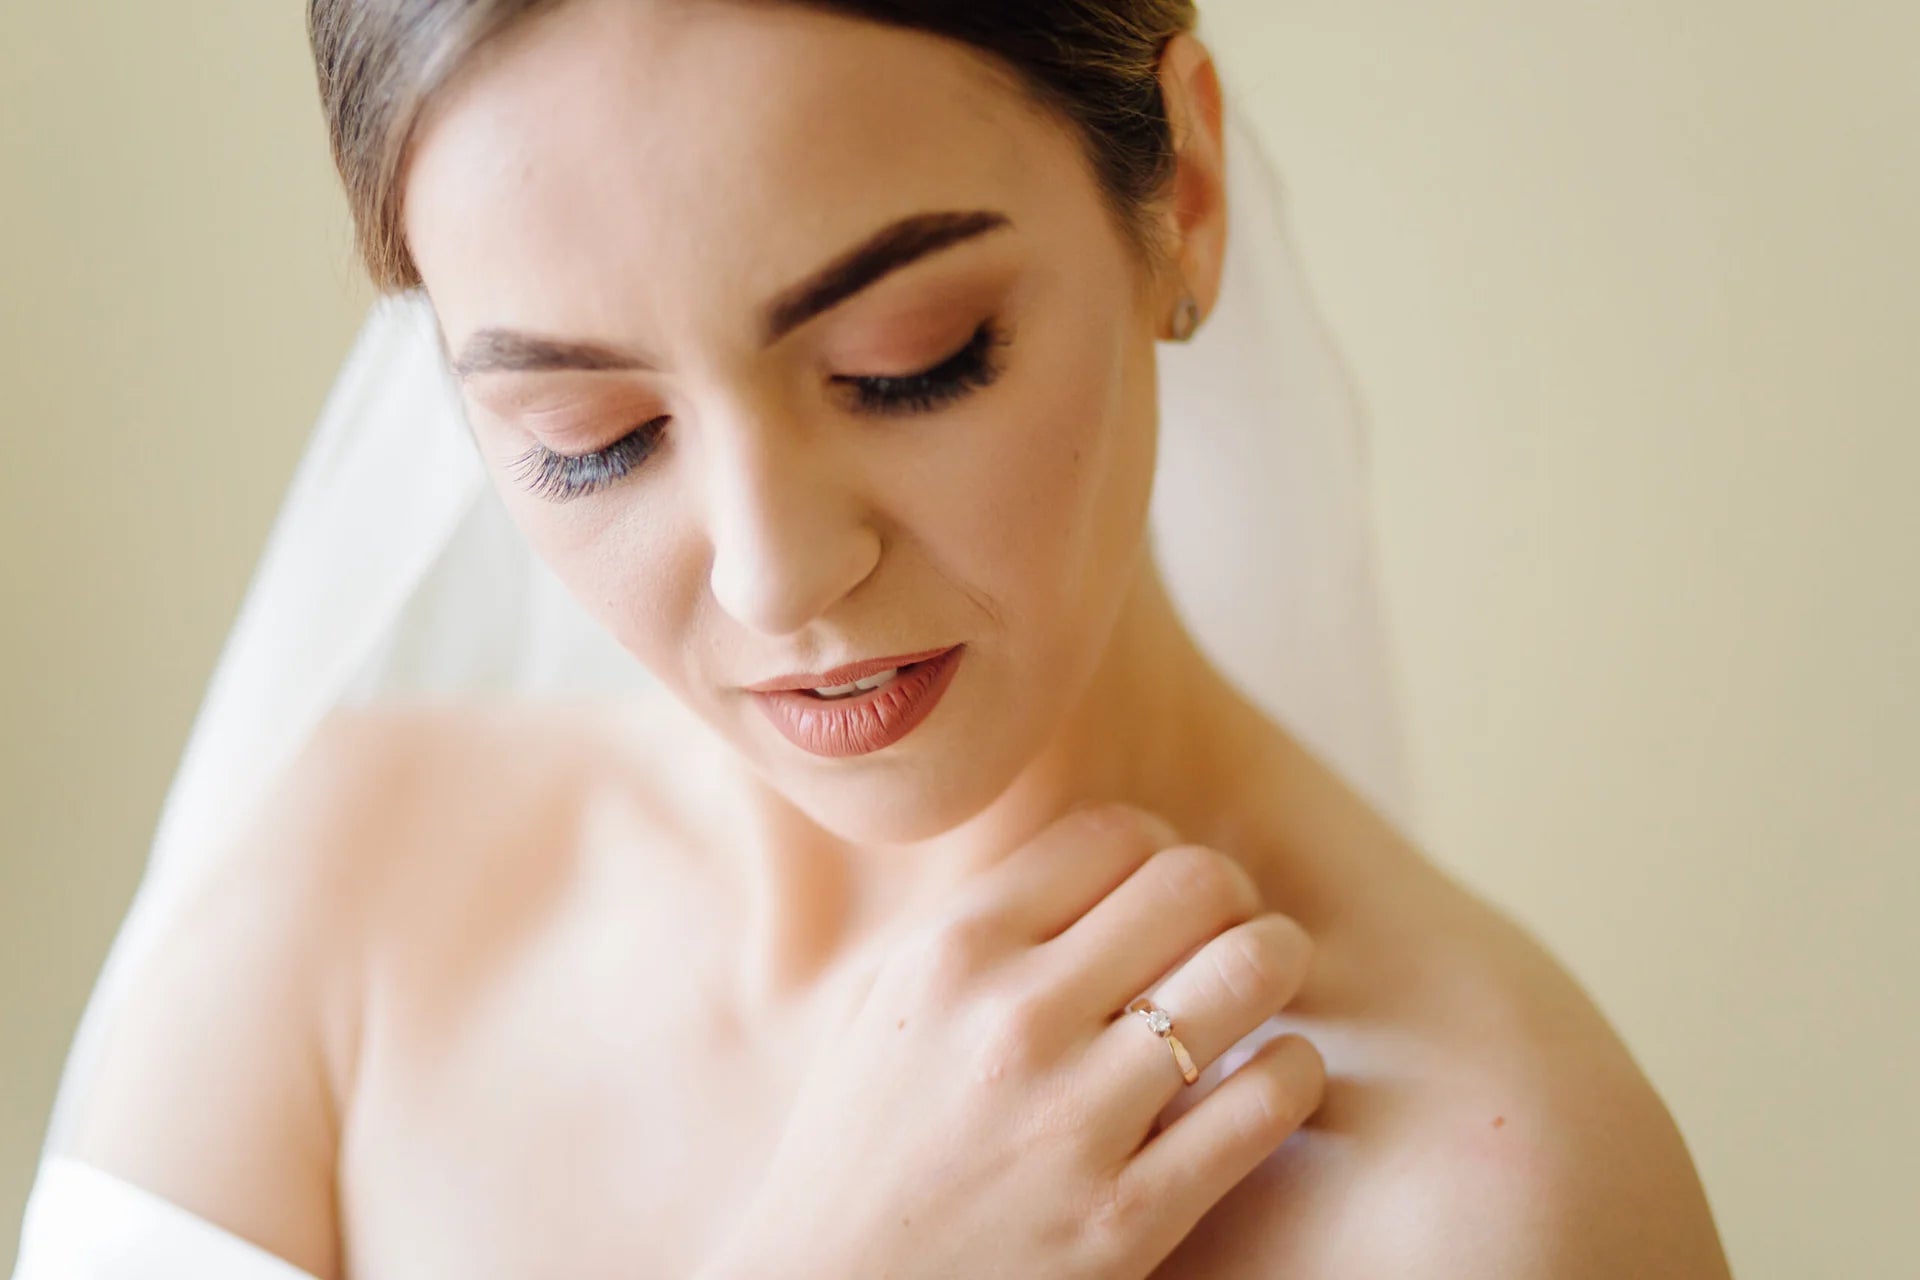 10 Awesome Reasons Why Lash Extensions Rock Over Falsies for an Amazing Wedding Look